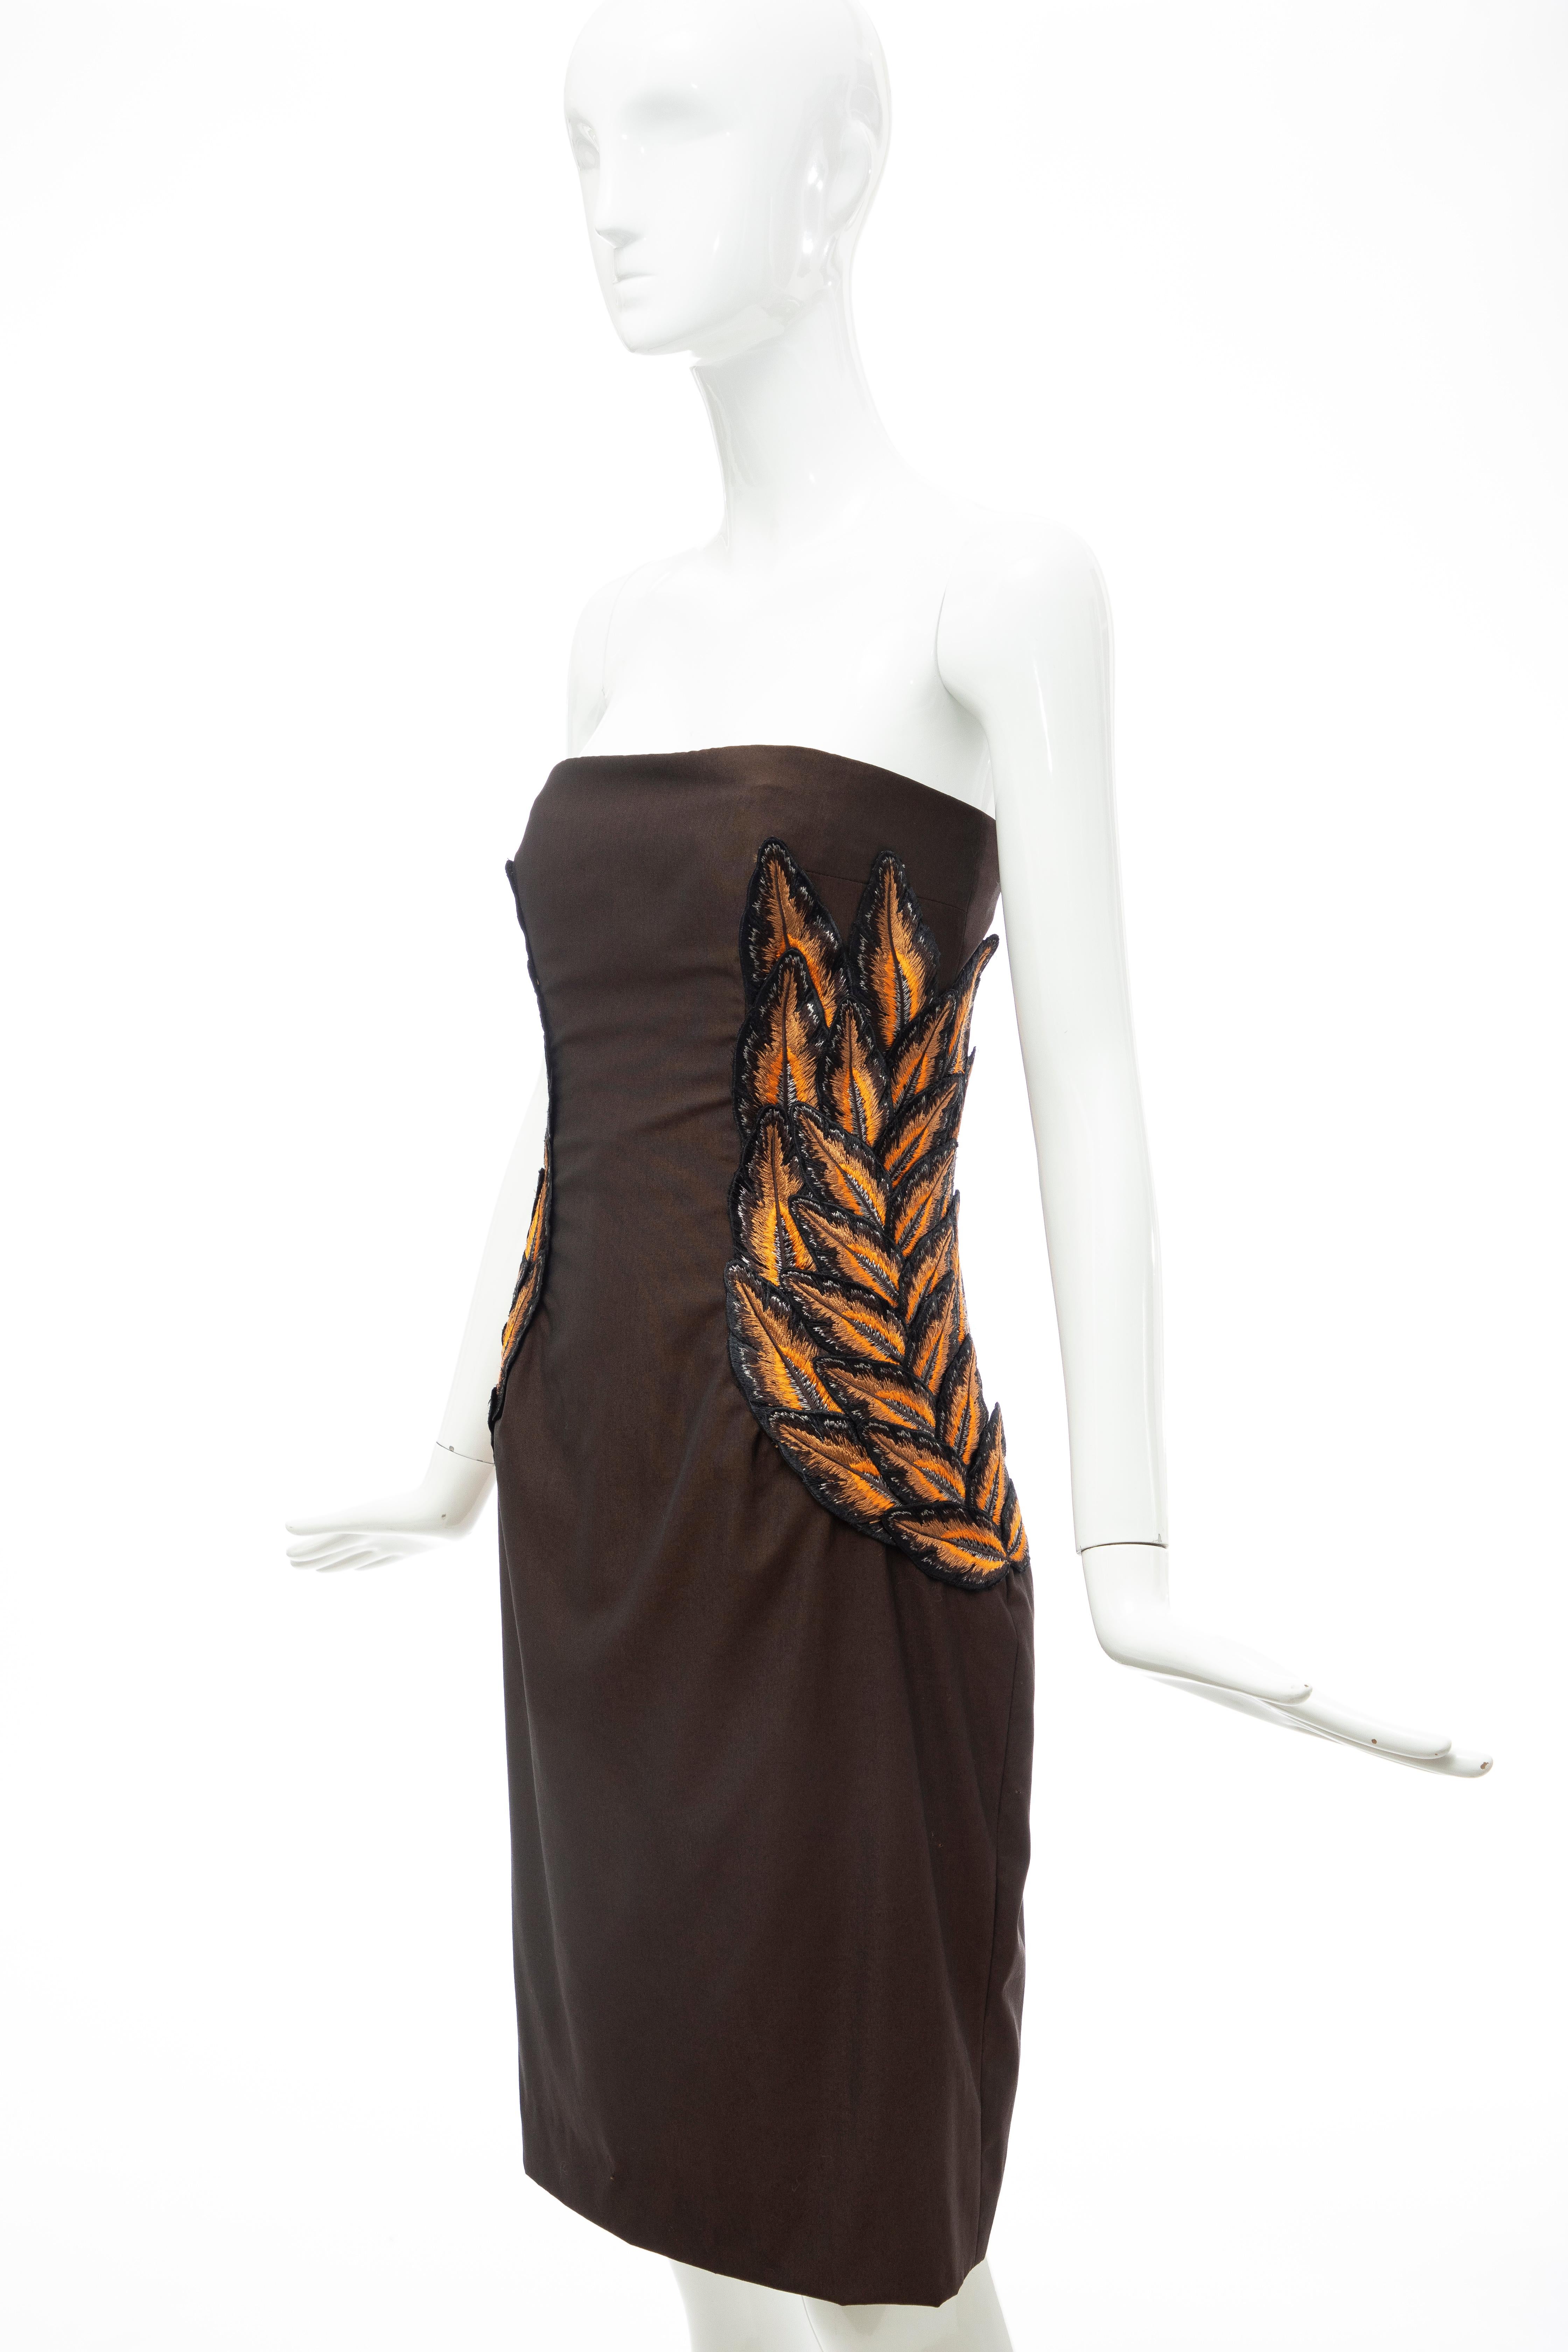 Women's Alexander McQueen Givenchy Couture Strapless Wool Embroidered Dress, Spring 1998 For Sale